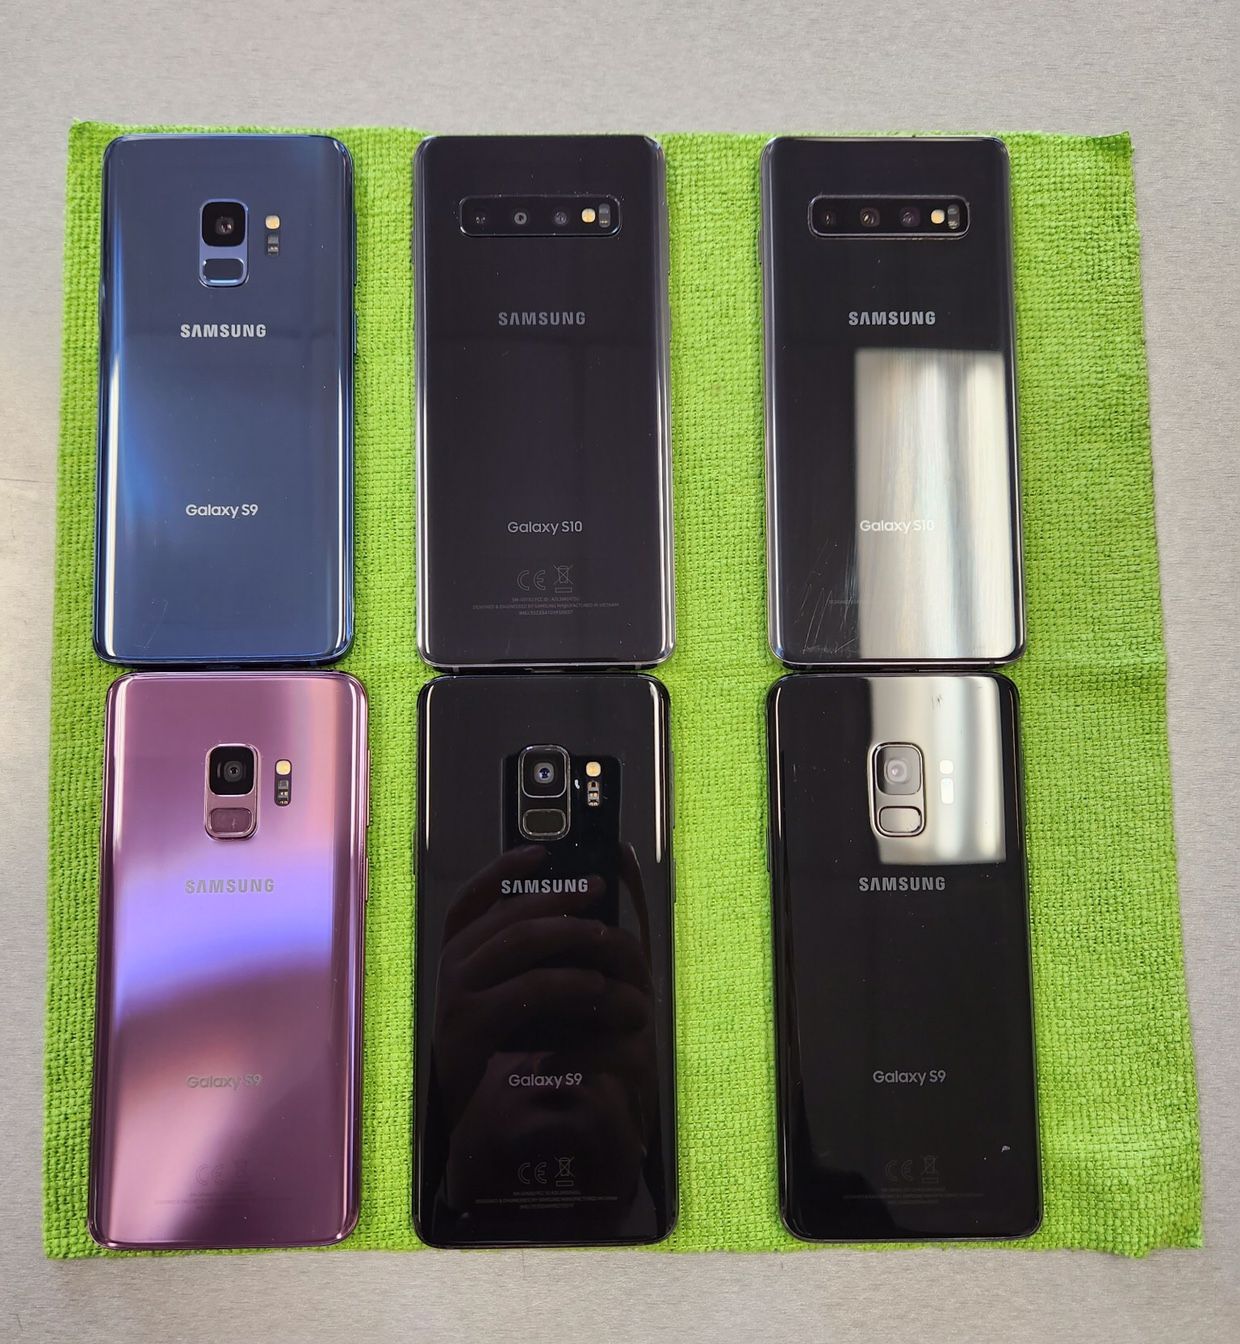 Samsung Galaxy S9 and S10 Unlocked, Cricket, AT&T, T-mobile, Metro Great for Christmas